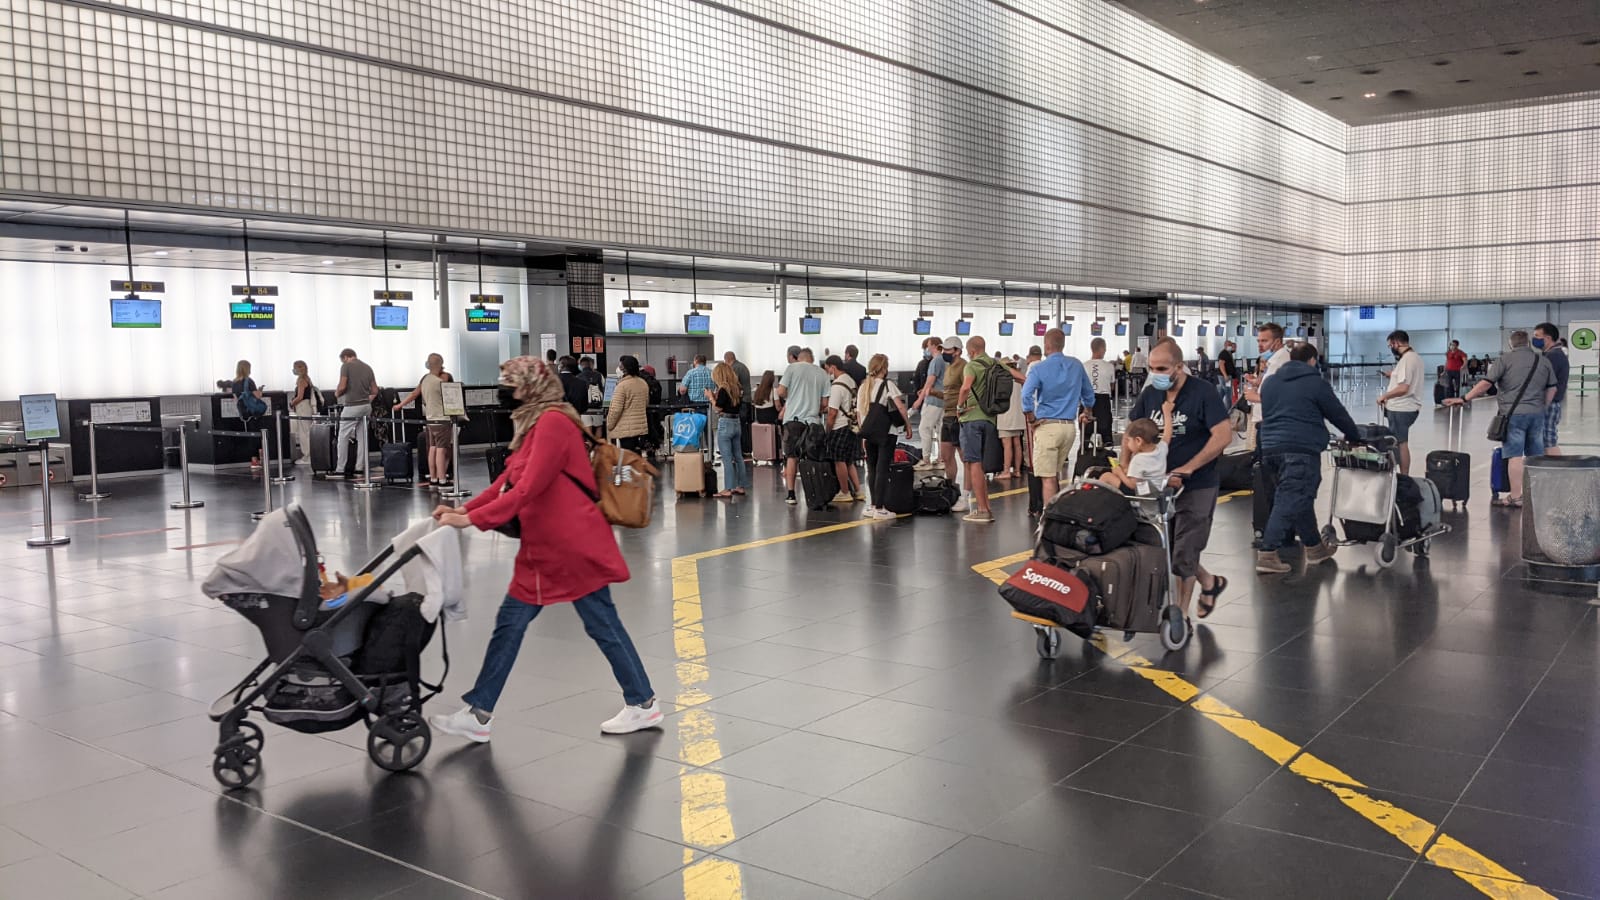 Passengers in Barcelona's T2 airport on its first day of reopening in June 2021 (by Cillian Shields)